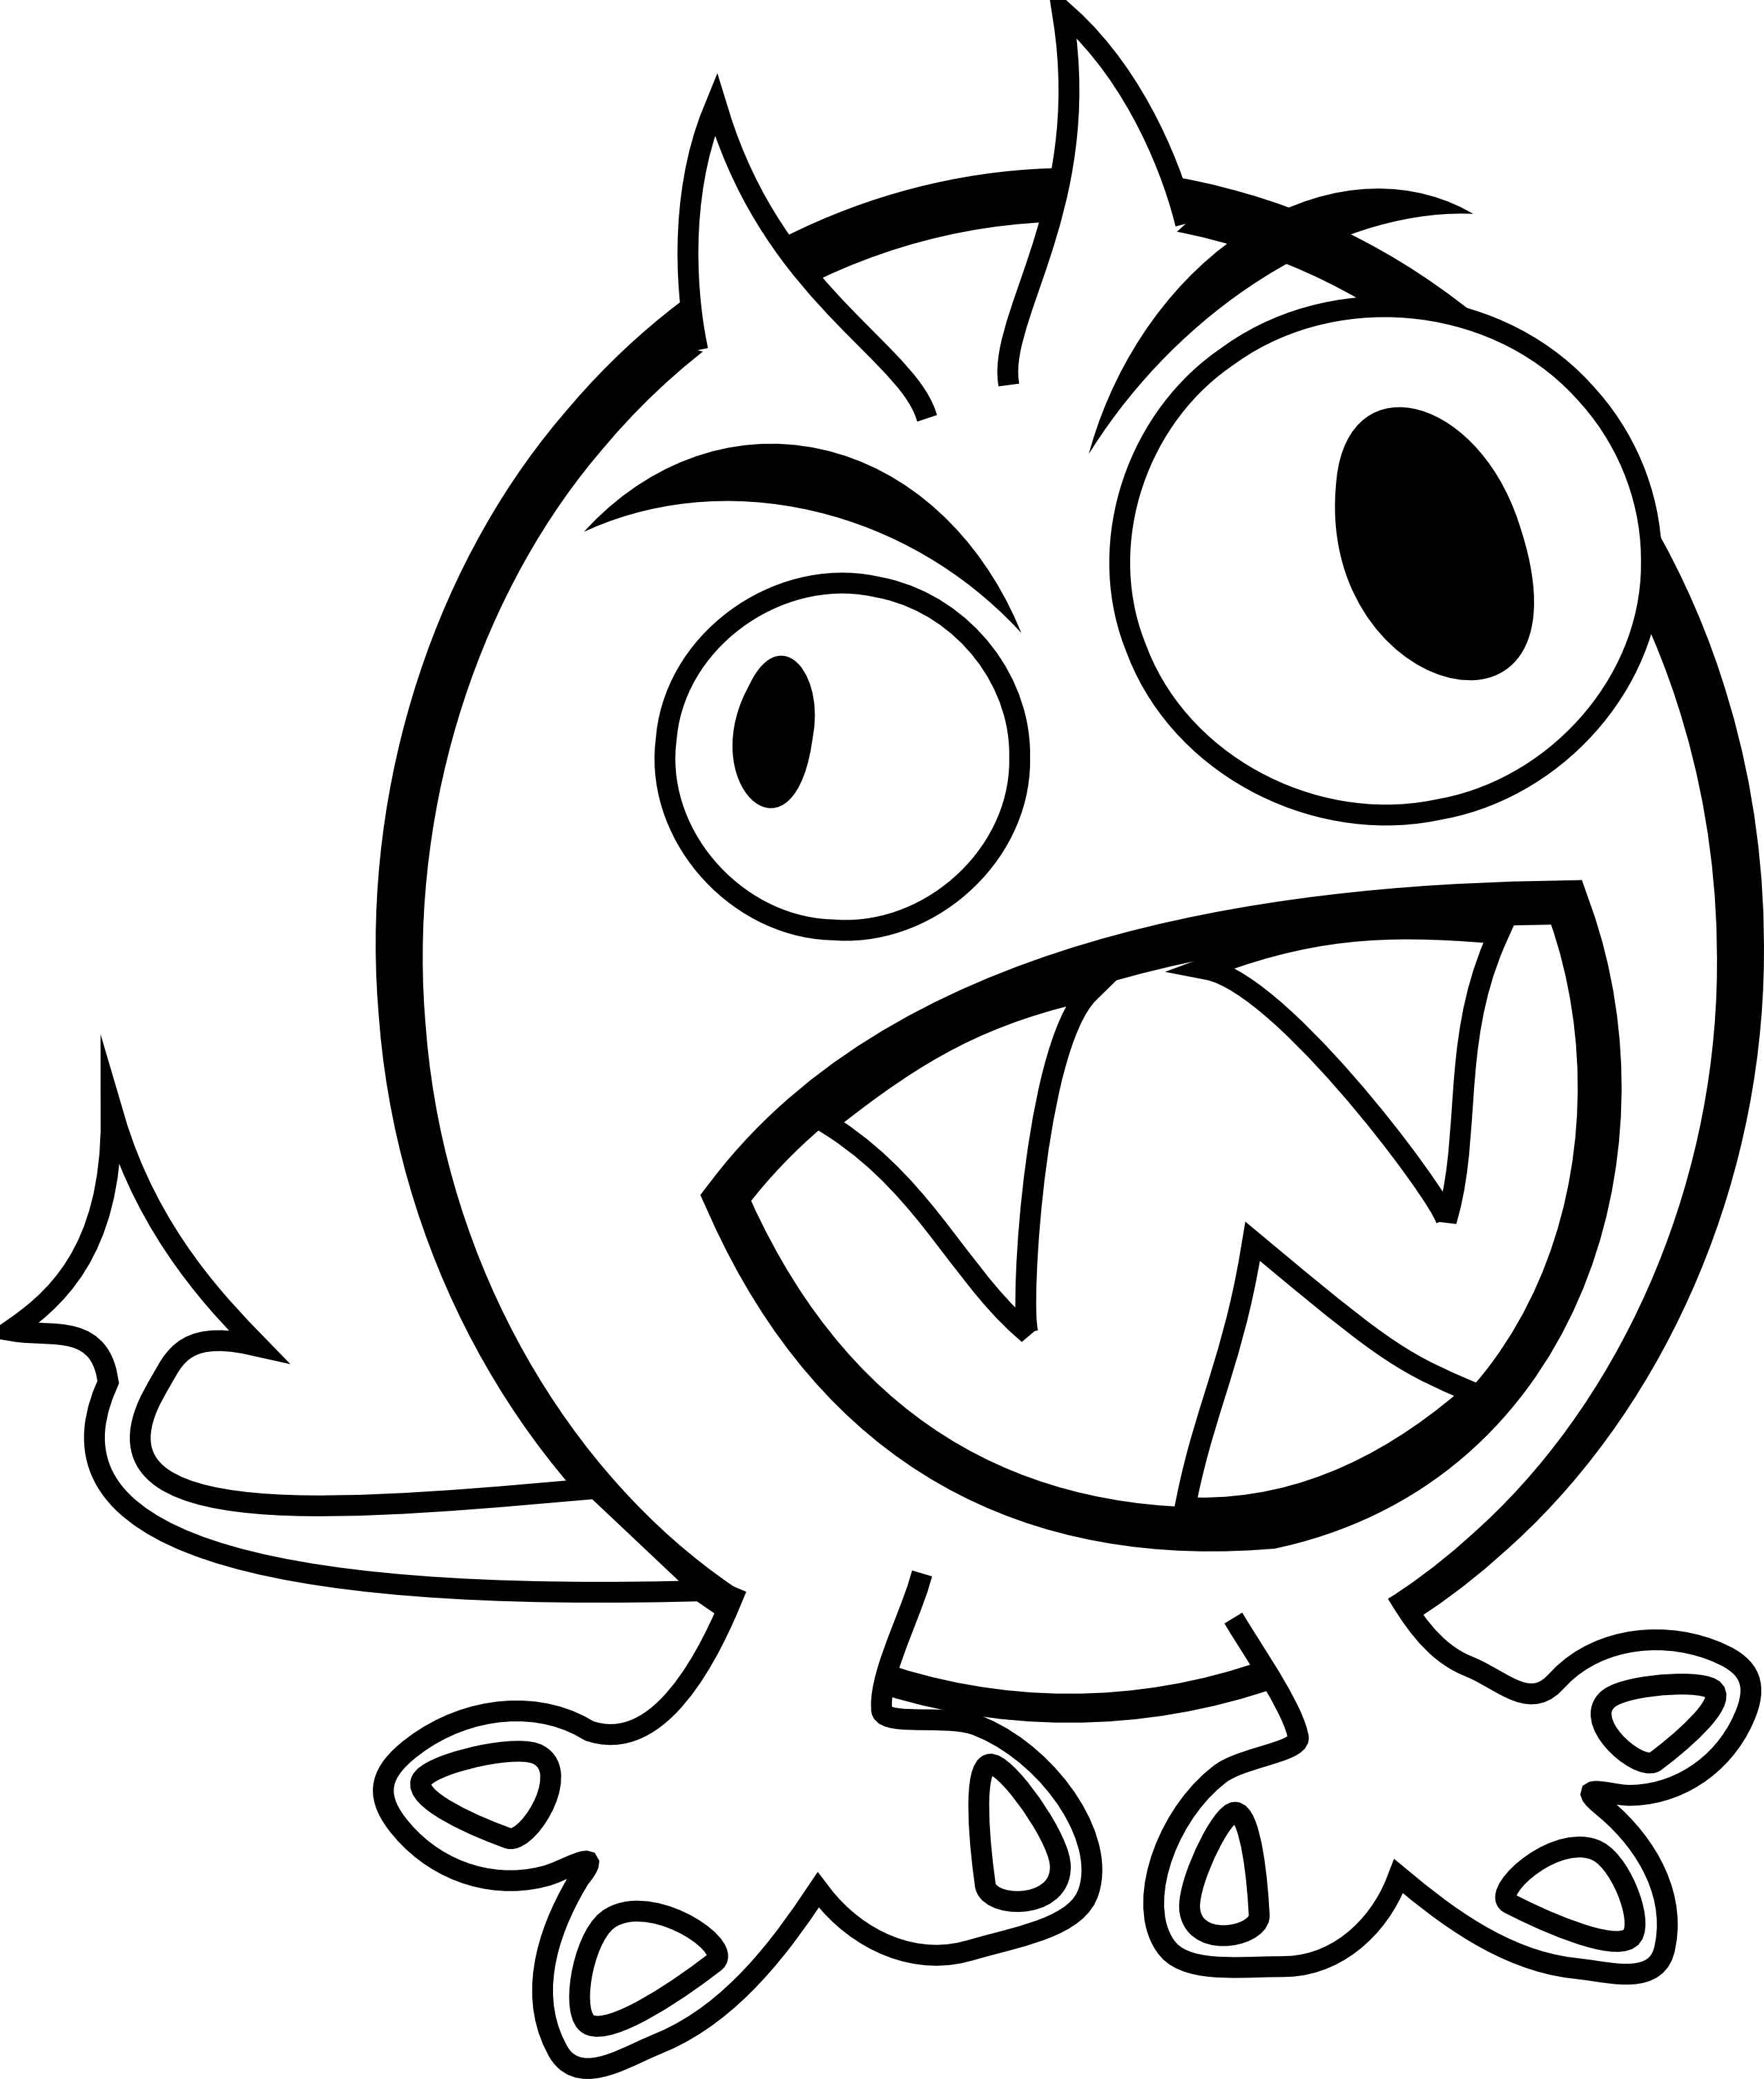 Angry Face Clip Art Black And White - Free Clipart ...